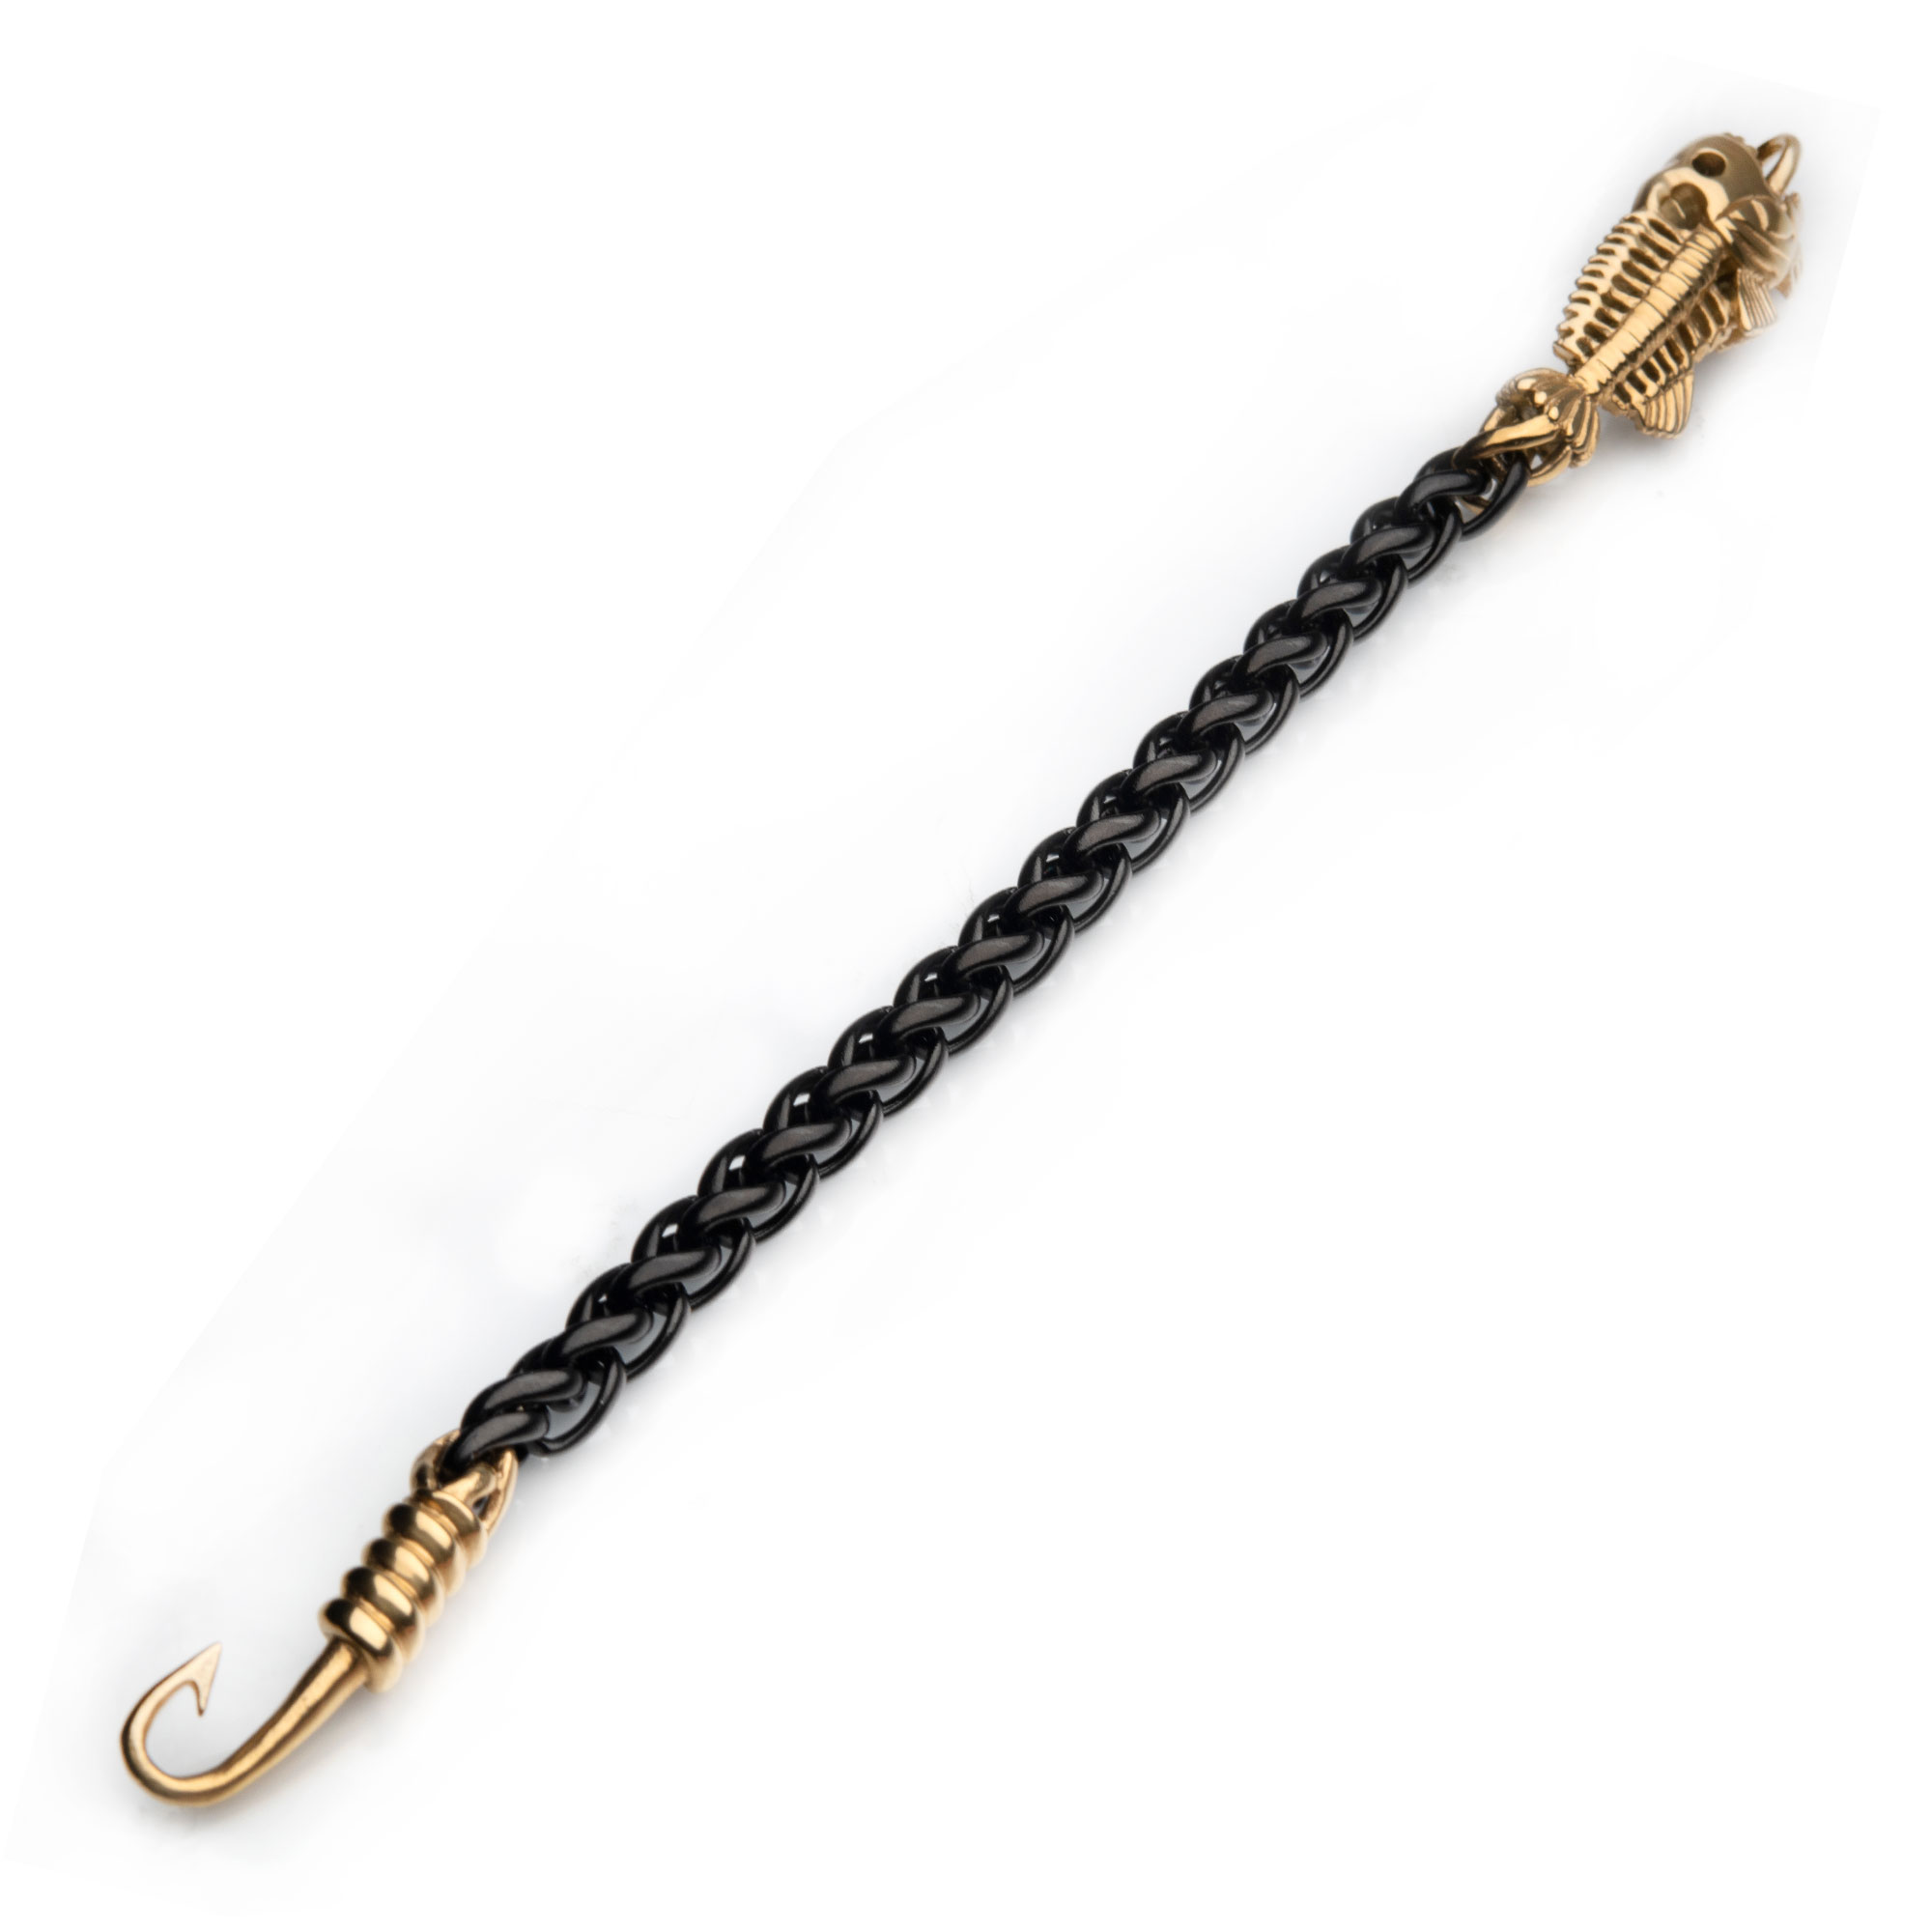 Black Plated Wheat Chain with Gold Plated Fishbone on Hook Clasp Bracelet Image 2 Midtown Diamonds Reno, NV